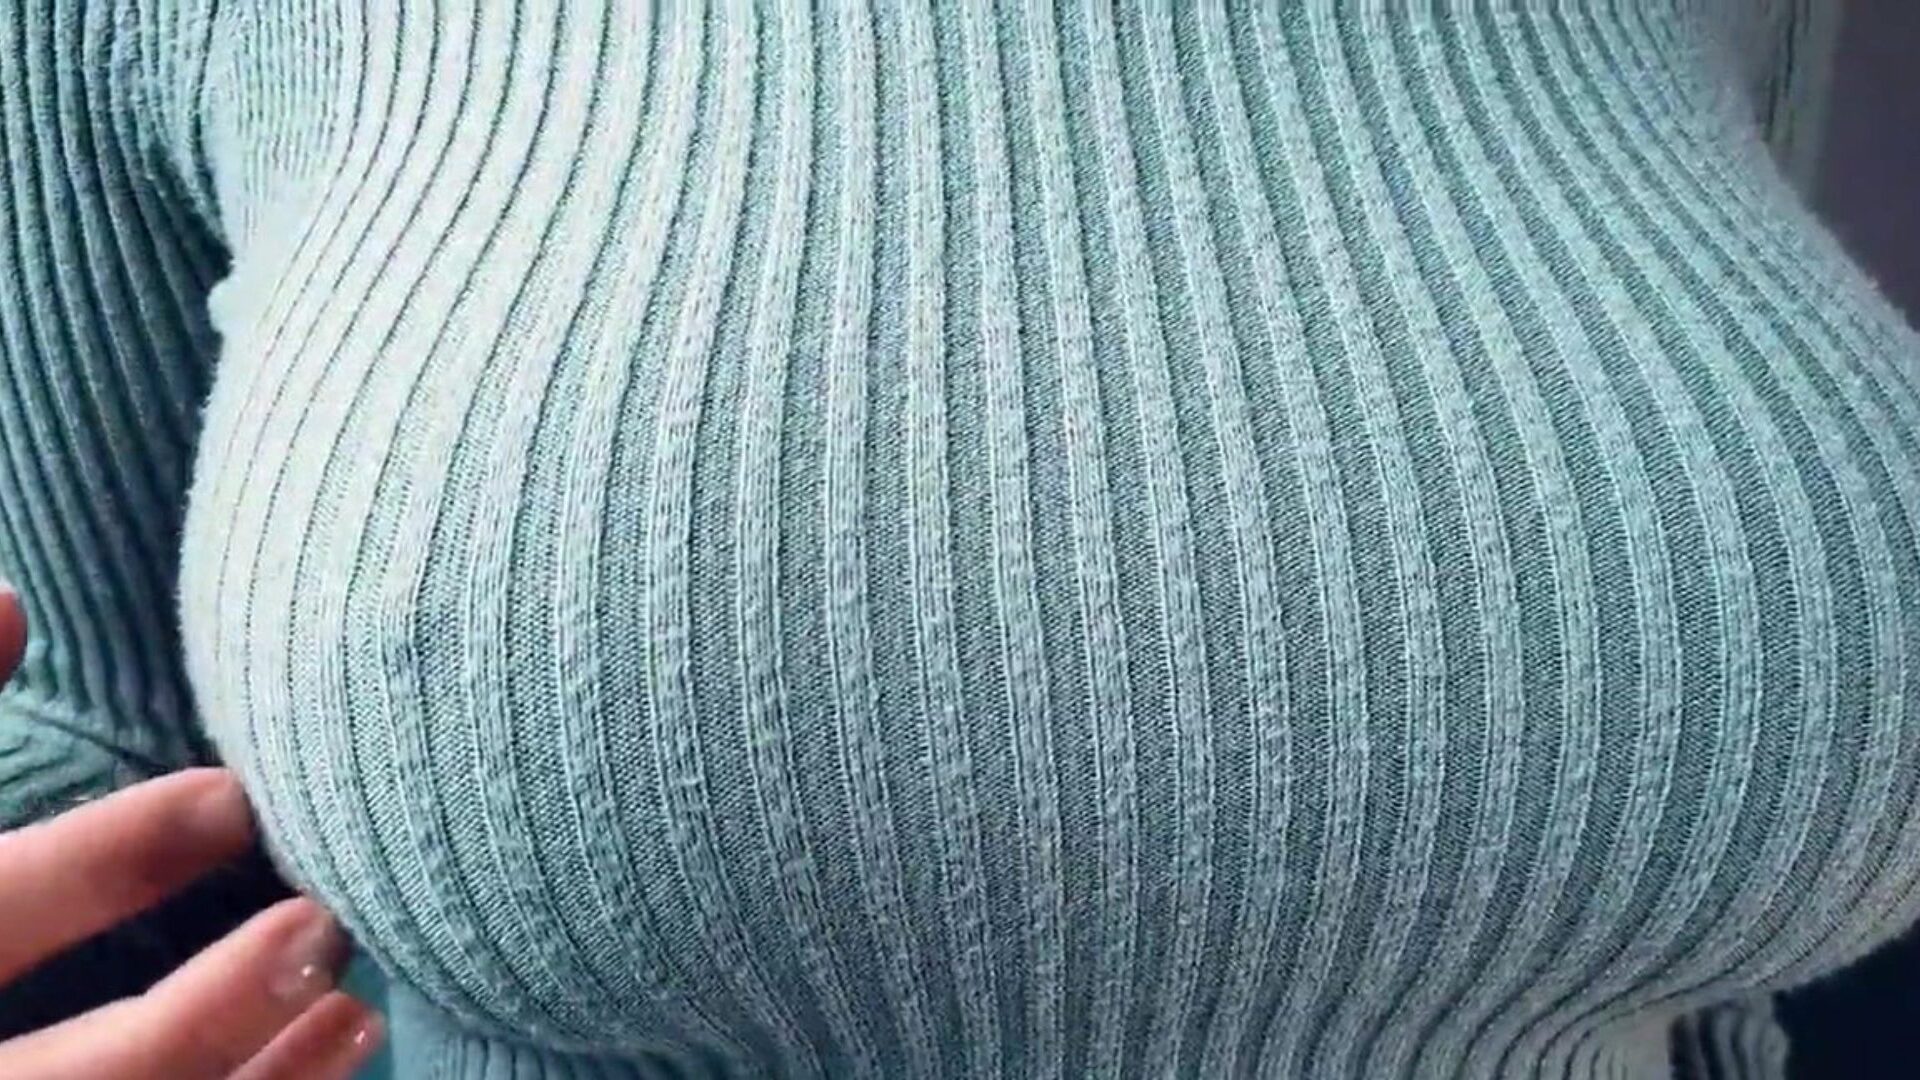 Big Tits Playing Teasing in a Tight Knitted Sweater... Watch Big Tits Playing Teasing in a Tight Knitted Sweater episode on xHamster - the ultimate selection of free 60 FPS & Knitting HD porno tube movies